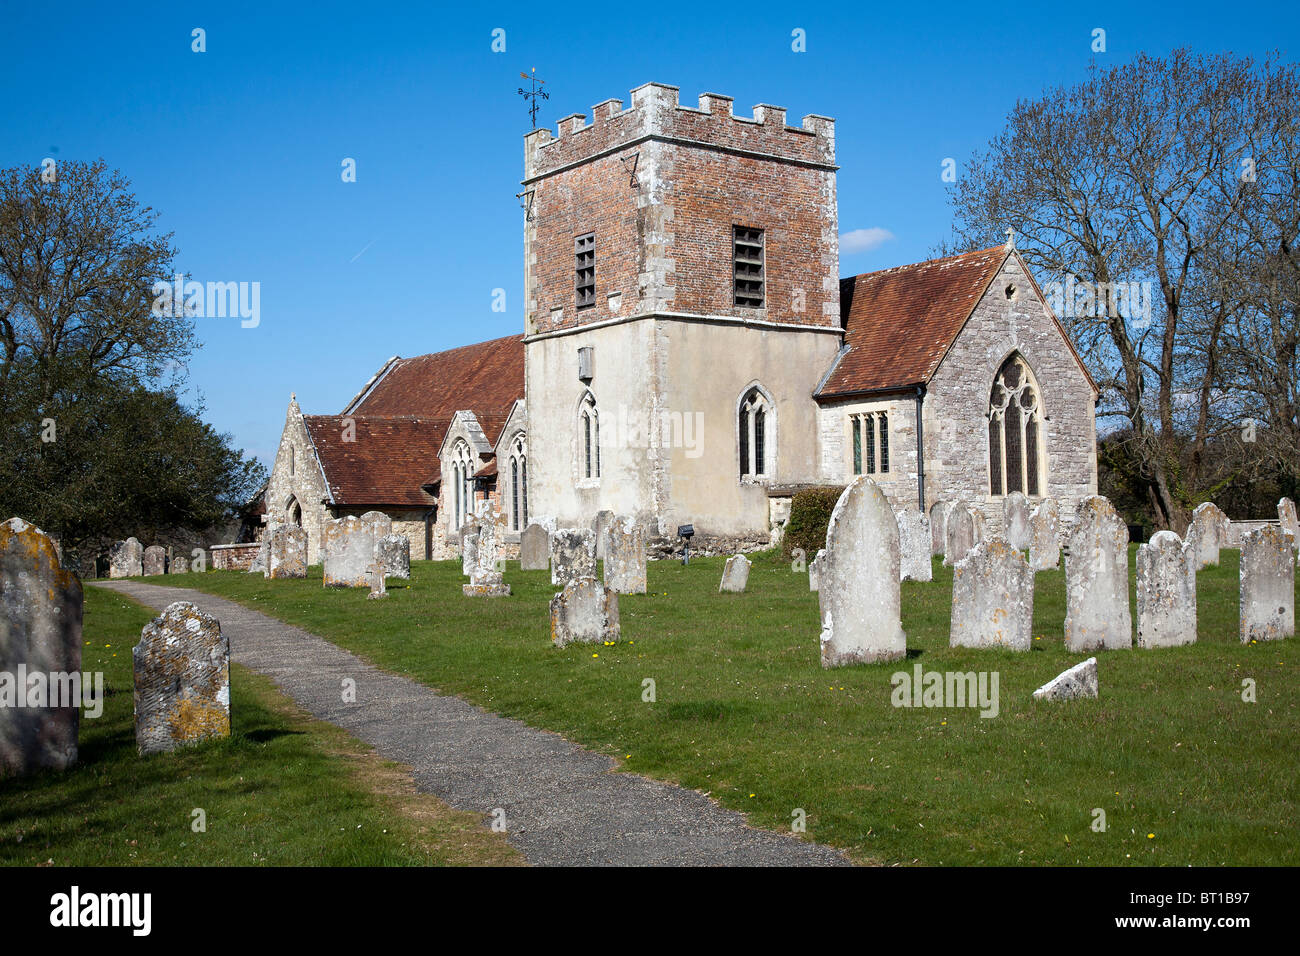 St John the Baptist a small traditional stone built church in the village of Boldre in the New Forest near Lymington Stock Photo